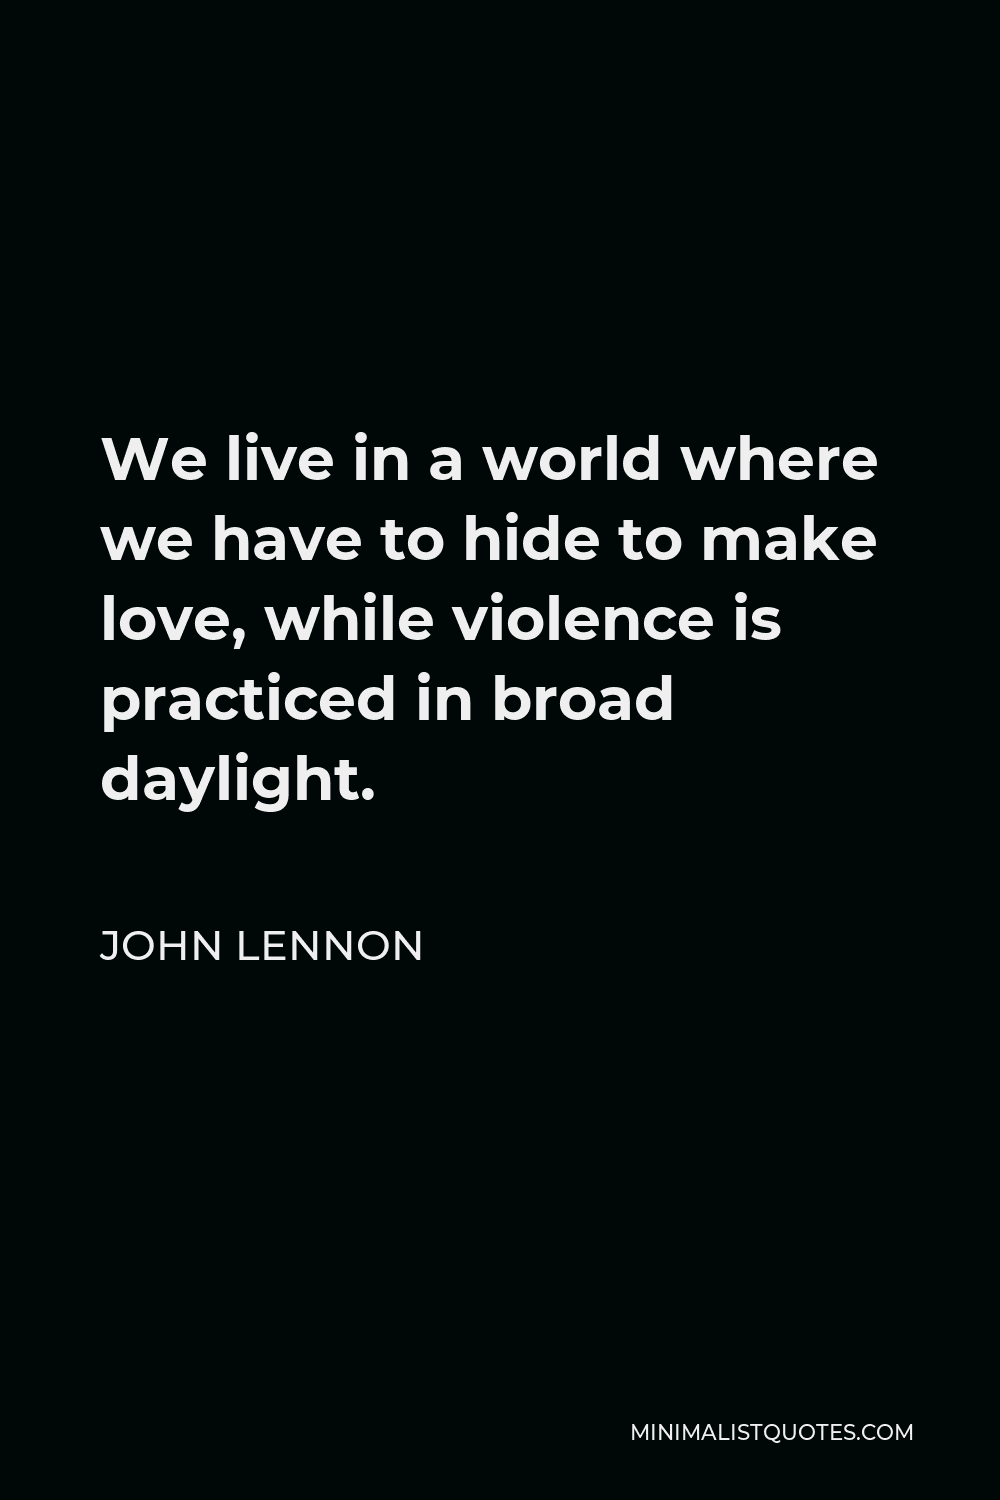 John Lennon Quote - We live in a world where we have to hide to make love, while violence is practiced in broad daylight.